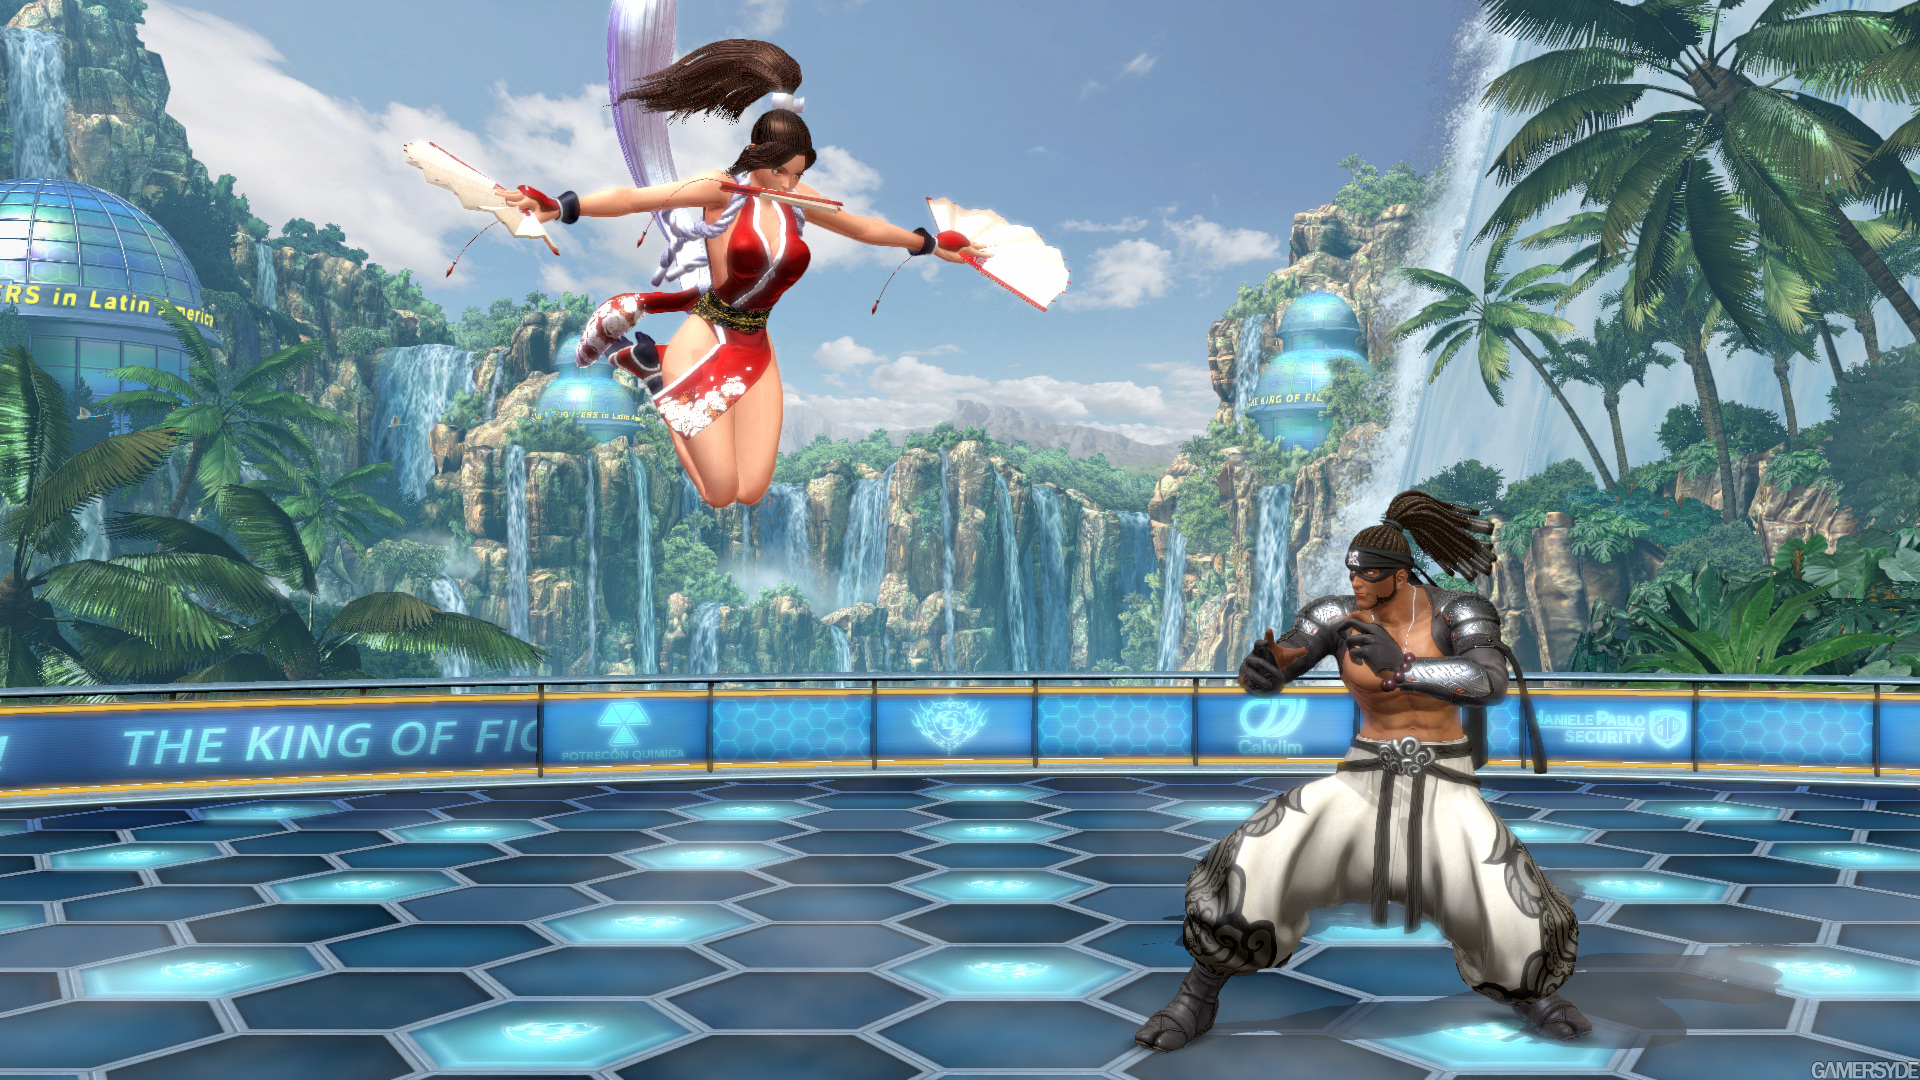 image_the_king_of_fighters_xiv-31591-3386_0002.jpg